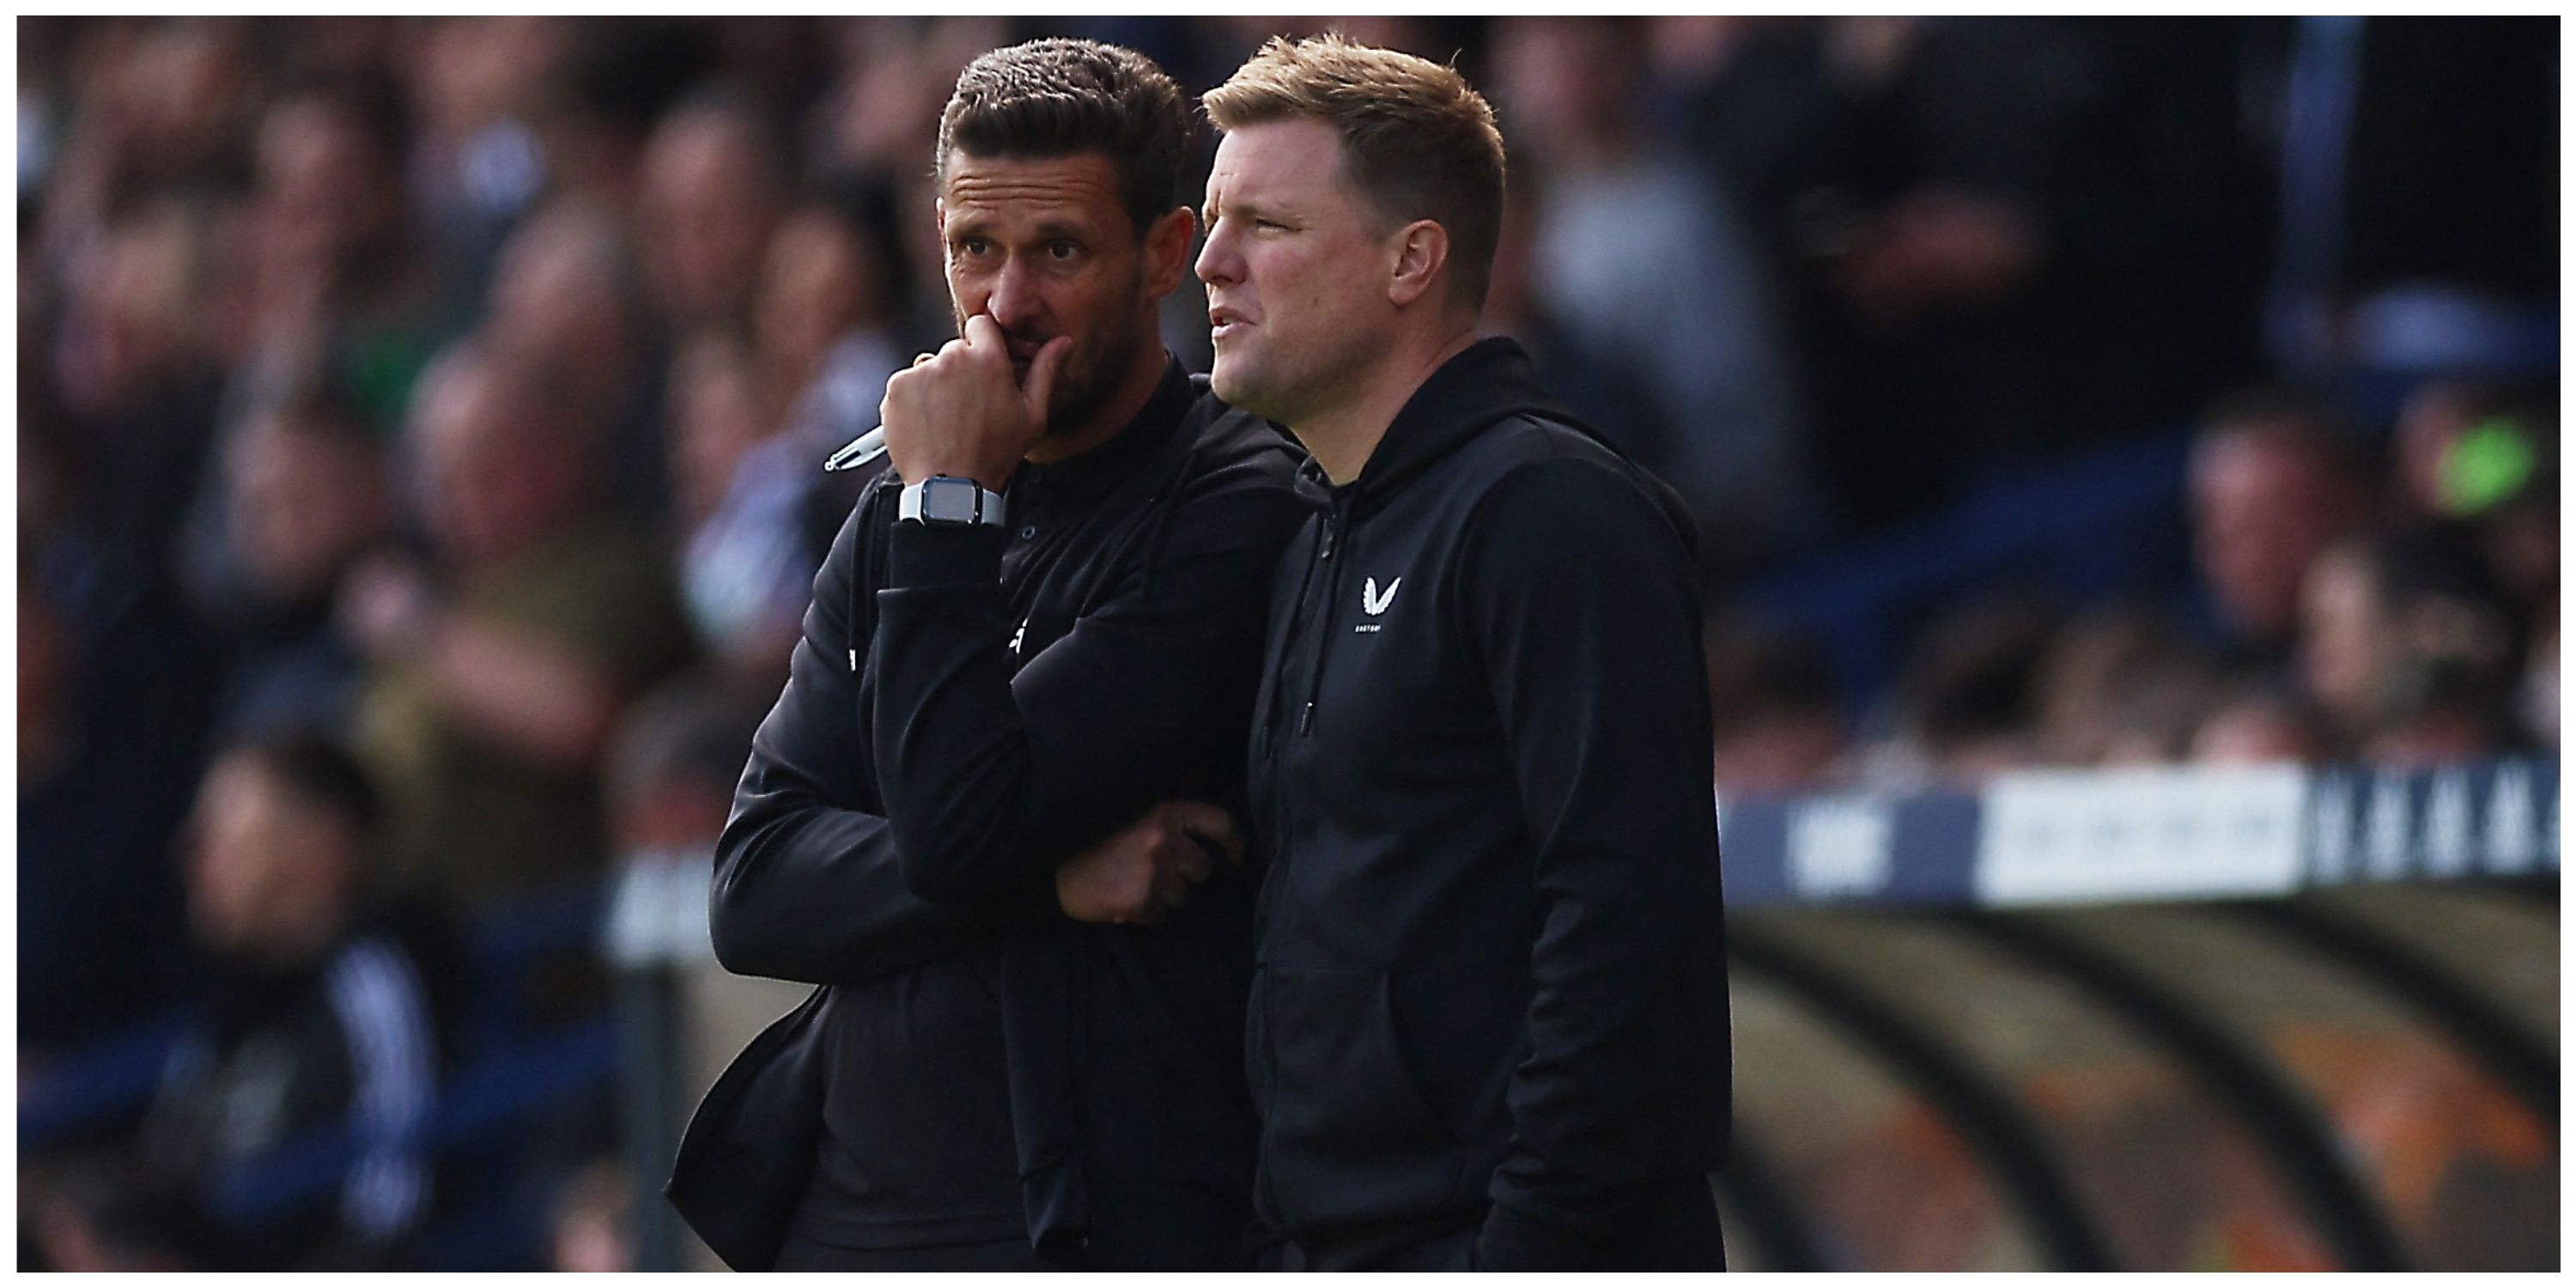 Newcastle United manager Eddie Howe and assistant manager Jason Tindall